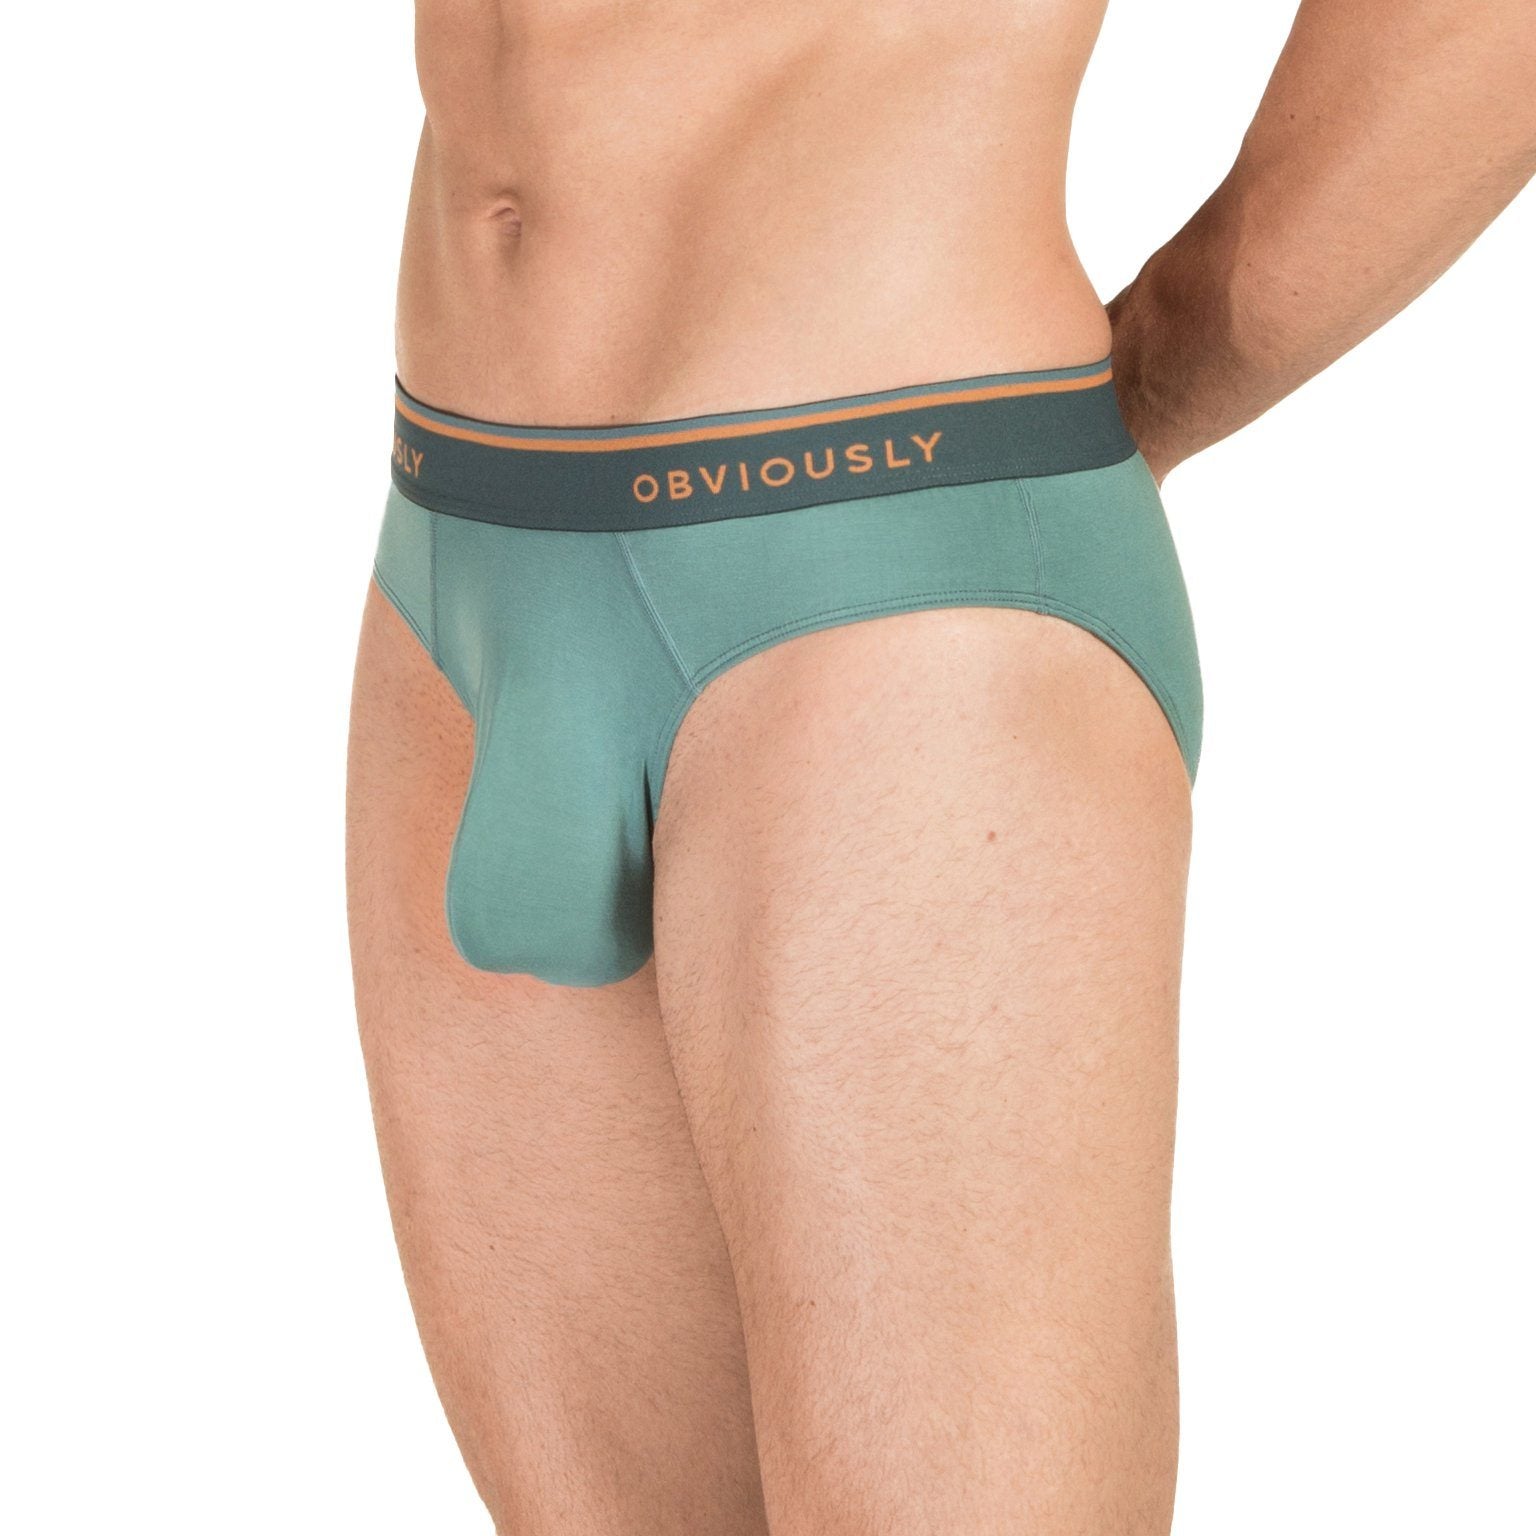 EveryMan - Brief Obviously Apparel Teal Small 